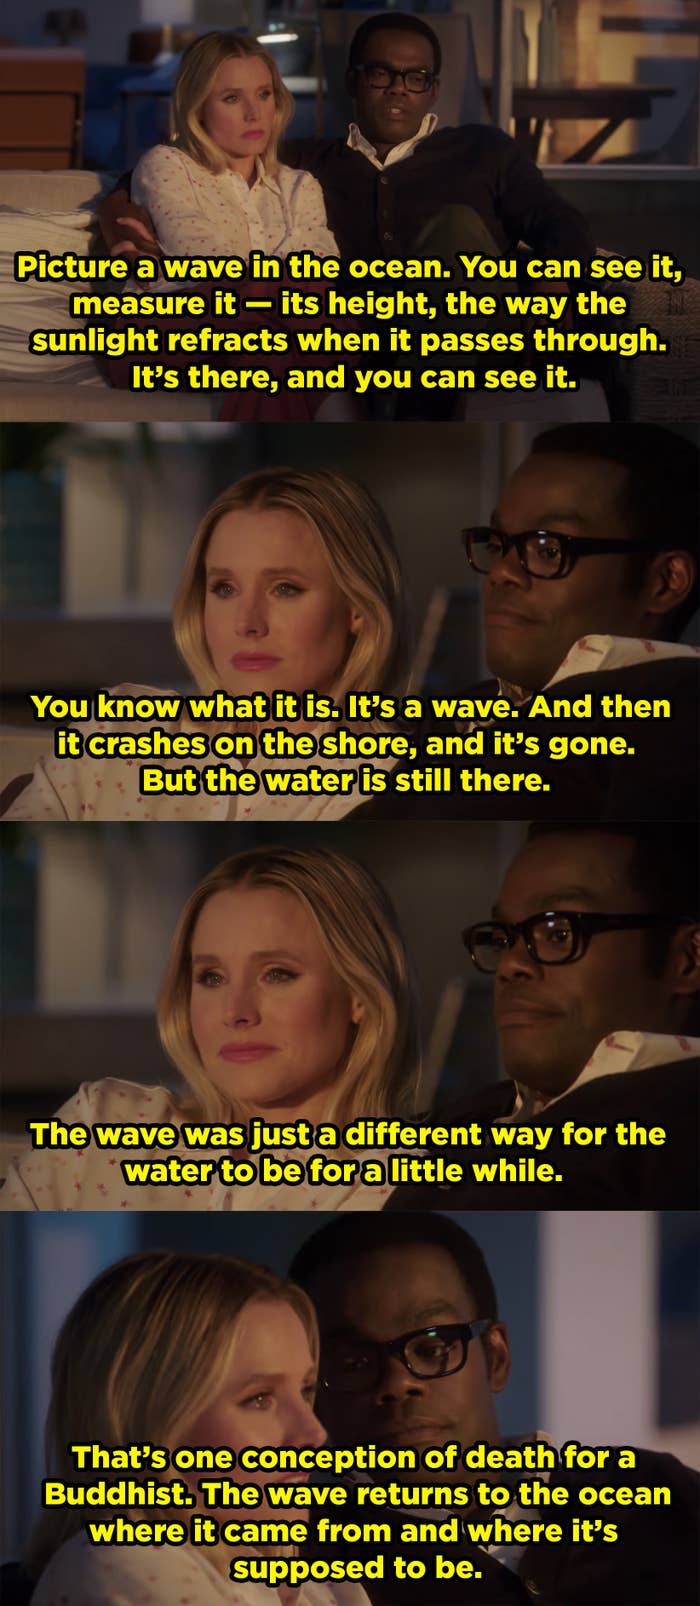 Chidi tells Eleanor about how a wave is only a wave for a little while, but its always water and once the wave crashes it goes back to the ocean, where it's supposed to be. He relates that to the Buddhist conception of death.